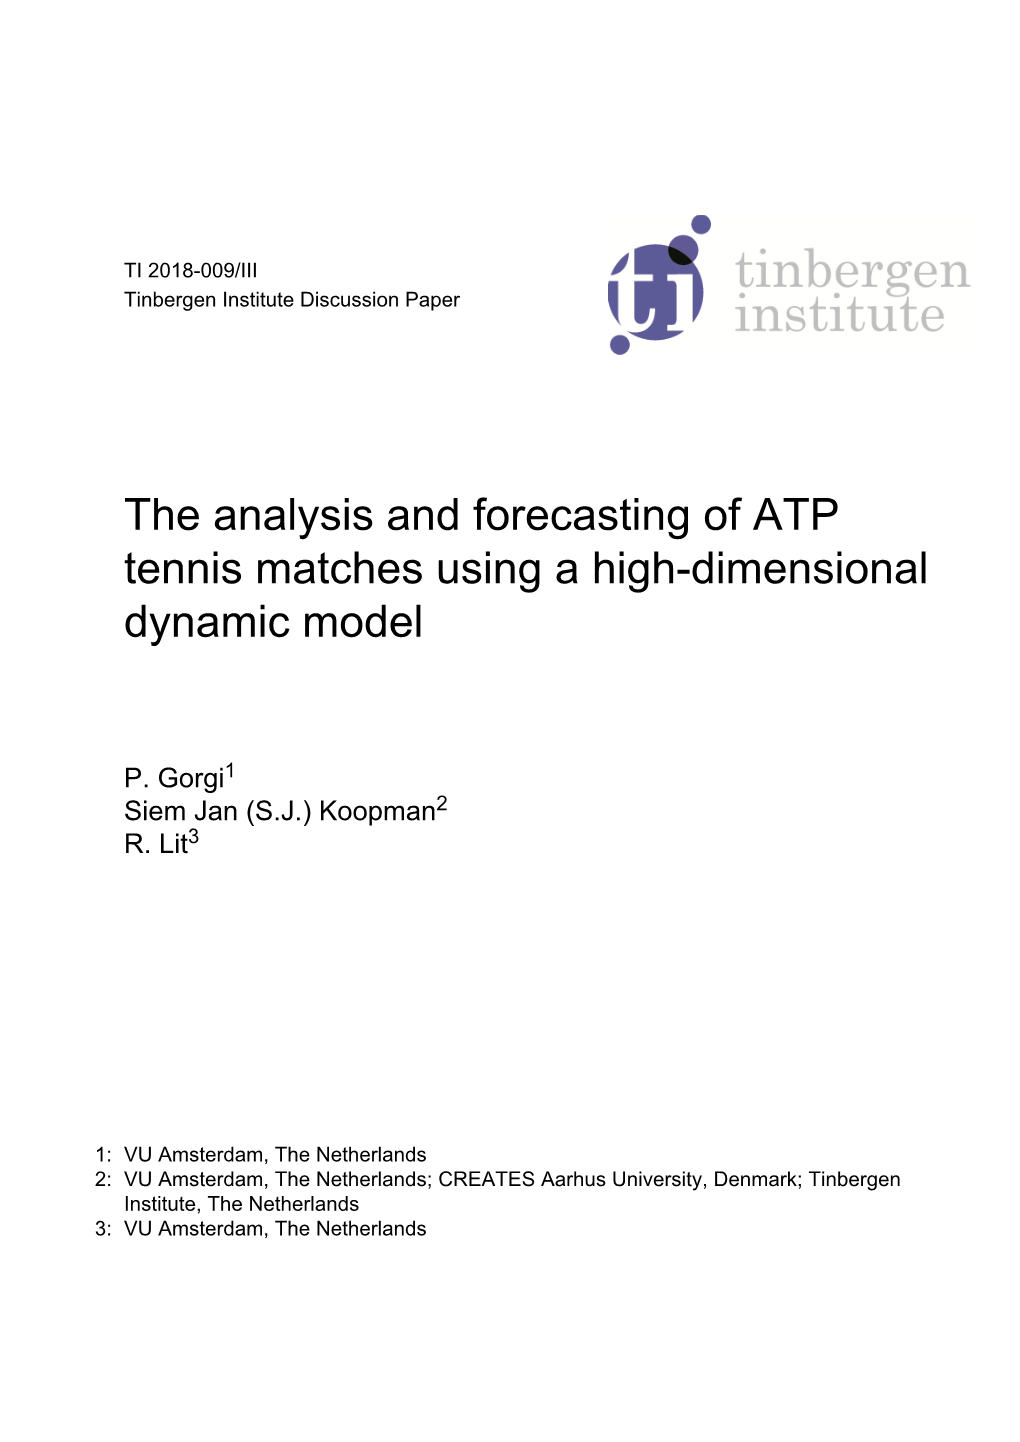 The Analysis and Forecasting of ATP Tennis Matches Using a High-Dimensional Dynamic Model